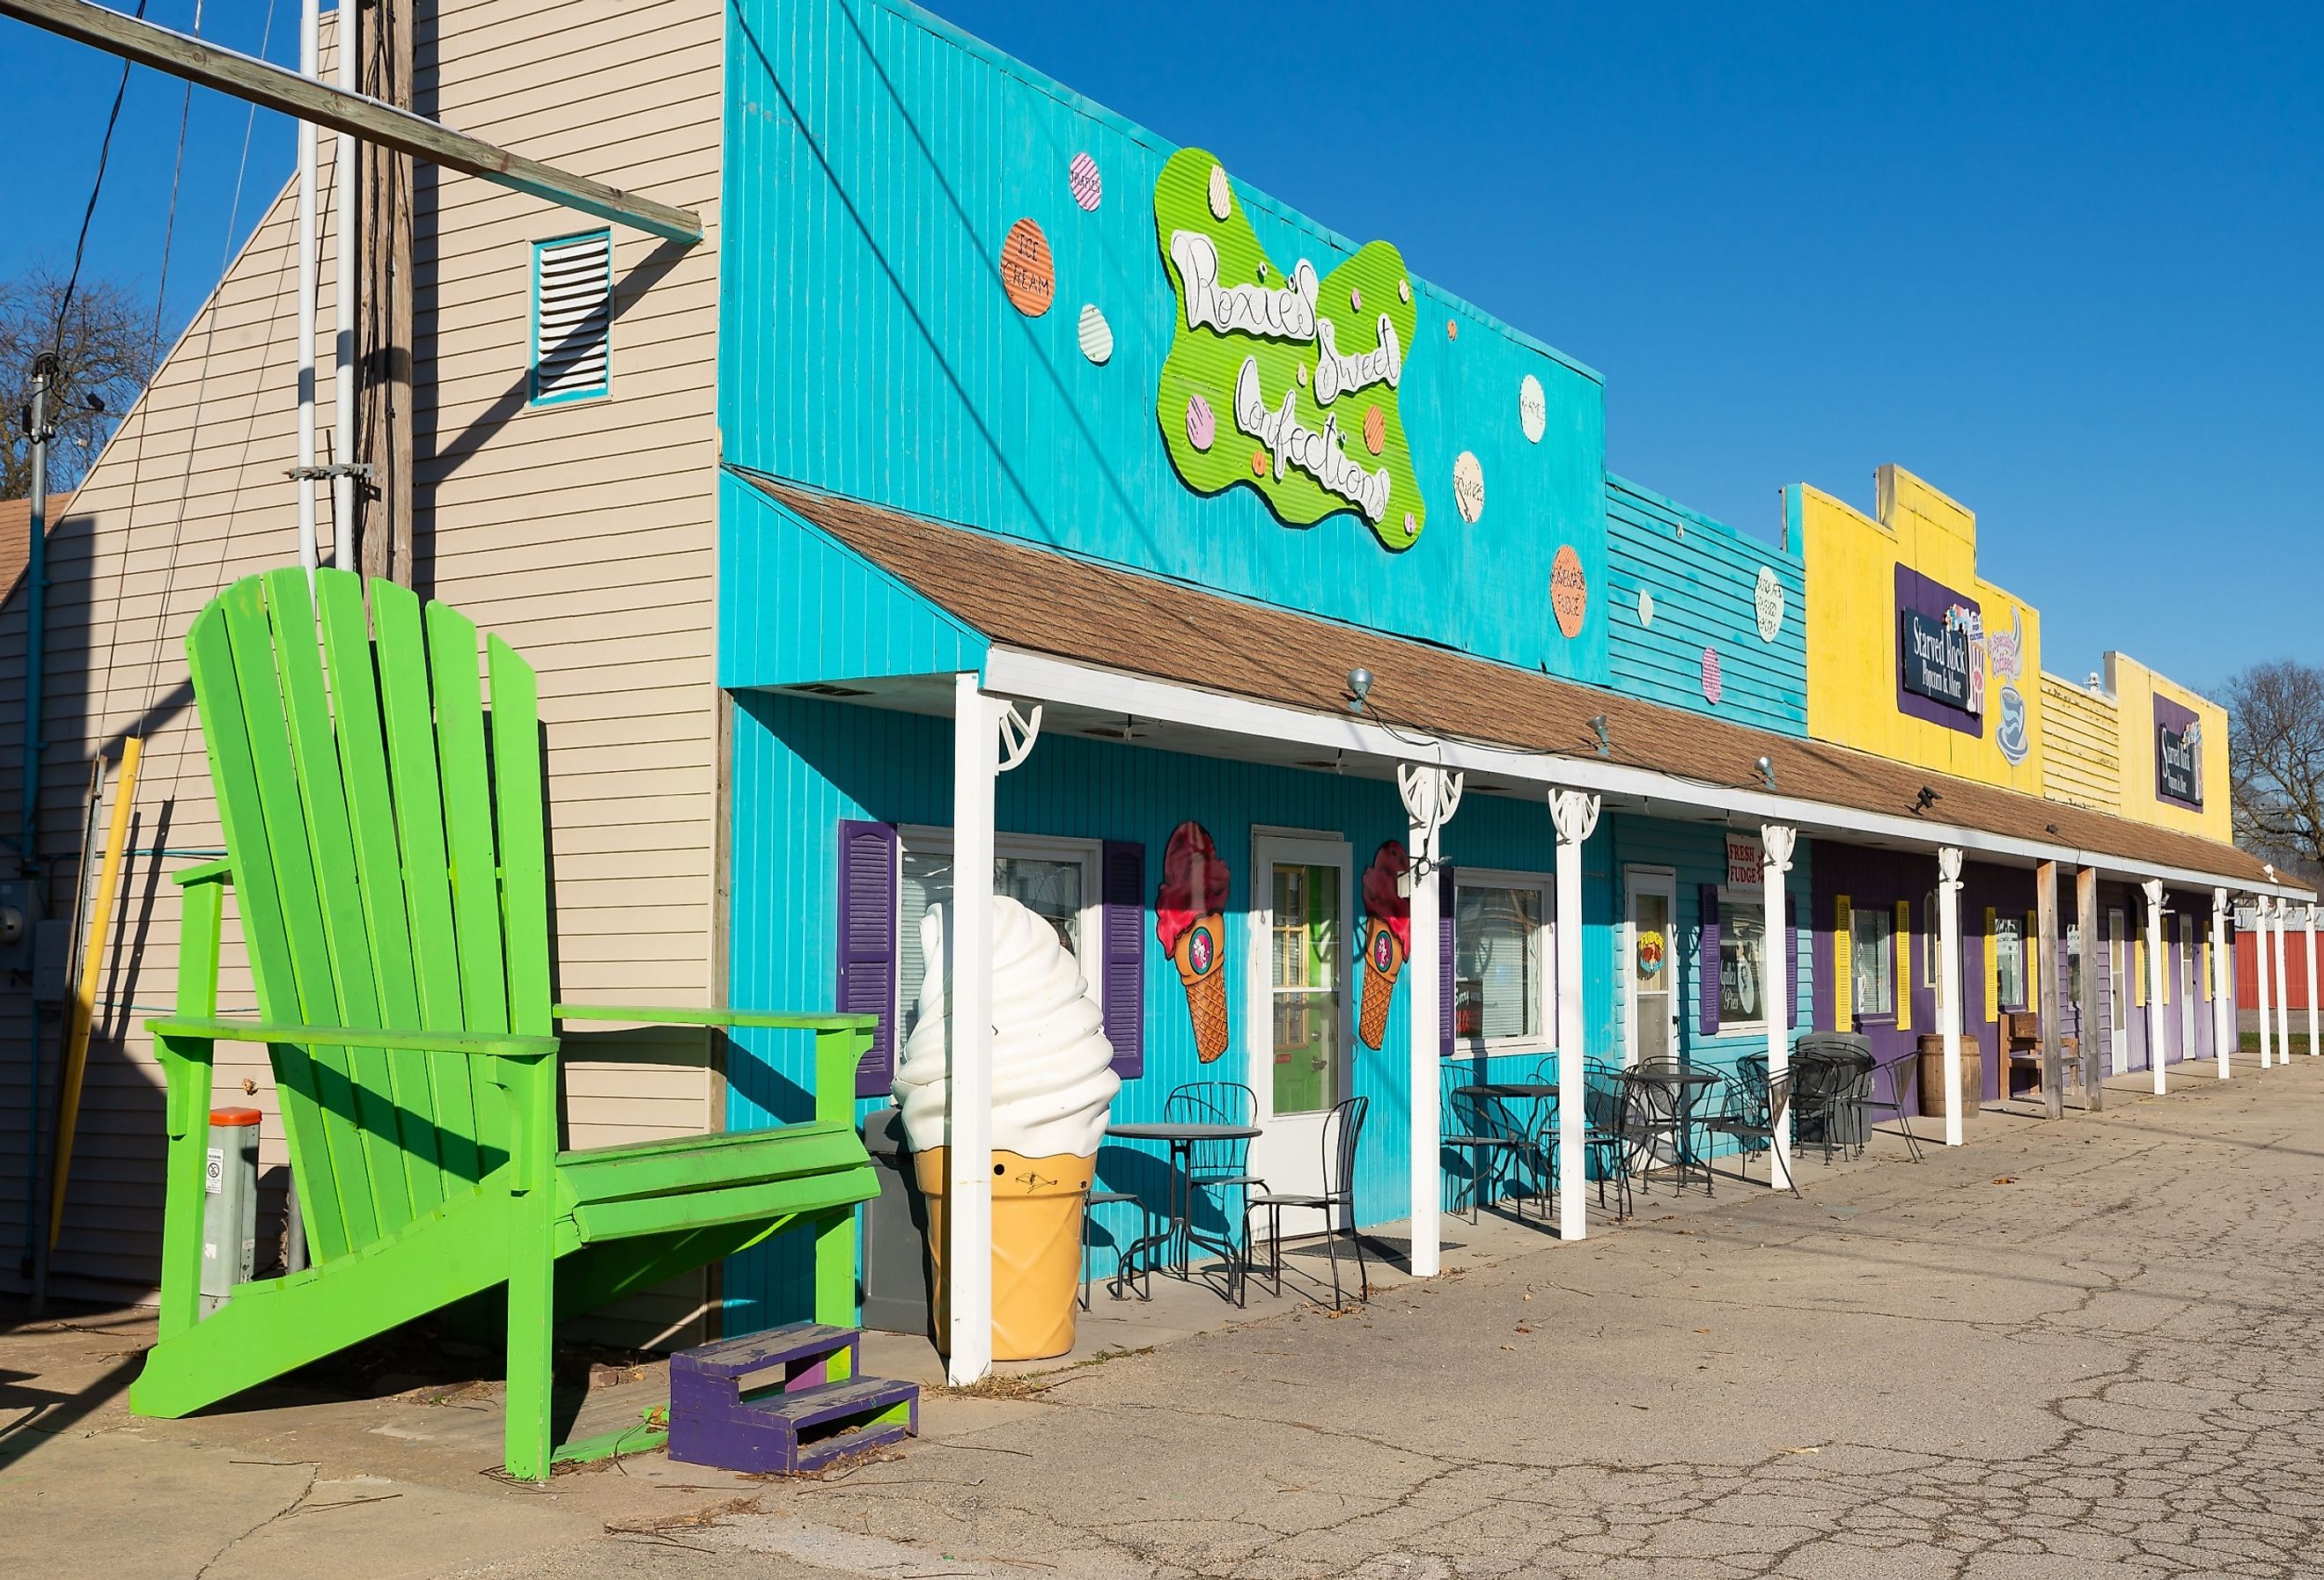 Colorful buildings and storefronts in North Utica, Illinois, USA. Image credit Eddie J. Rodriquez via Shutterstock.